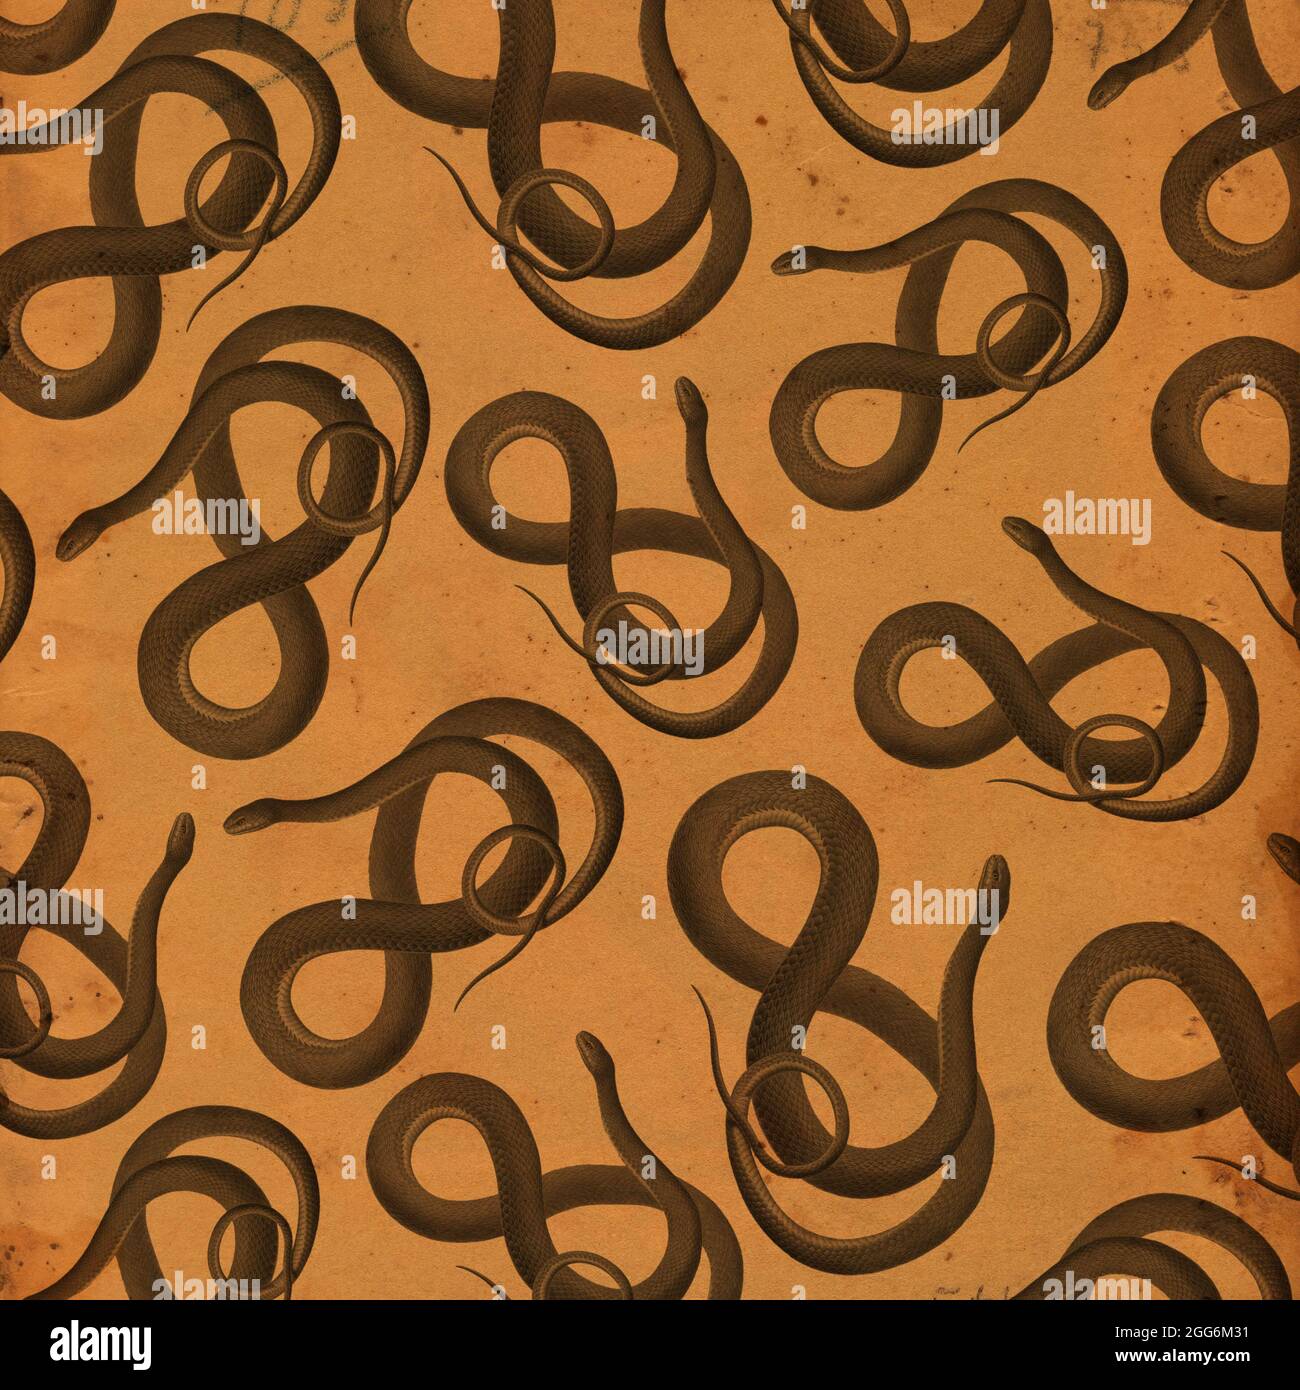 This is a vintage snake kraft style Halloween wallpaper or background created using antique elements Stock Photo